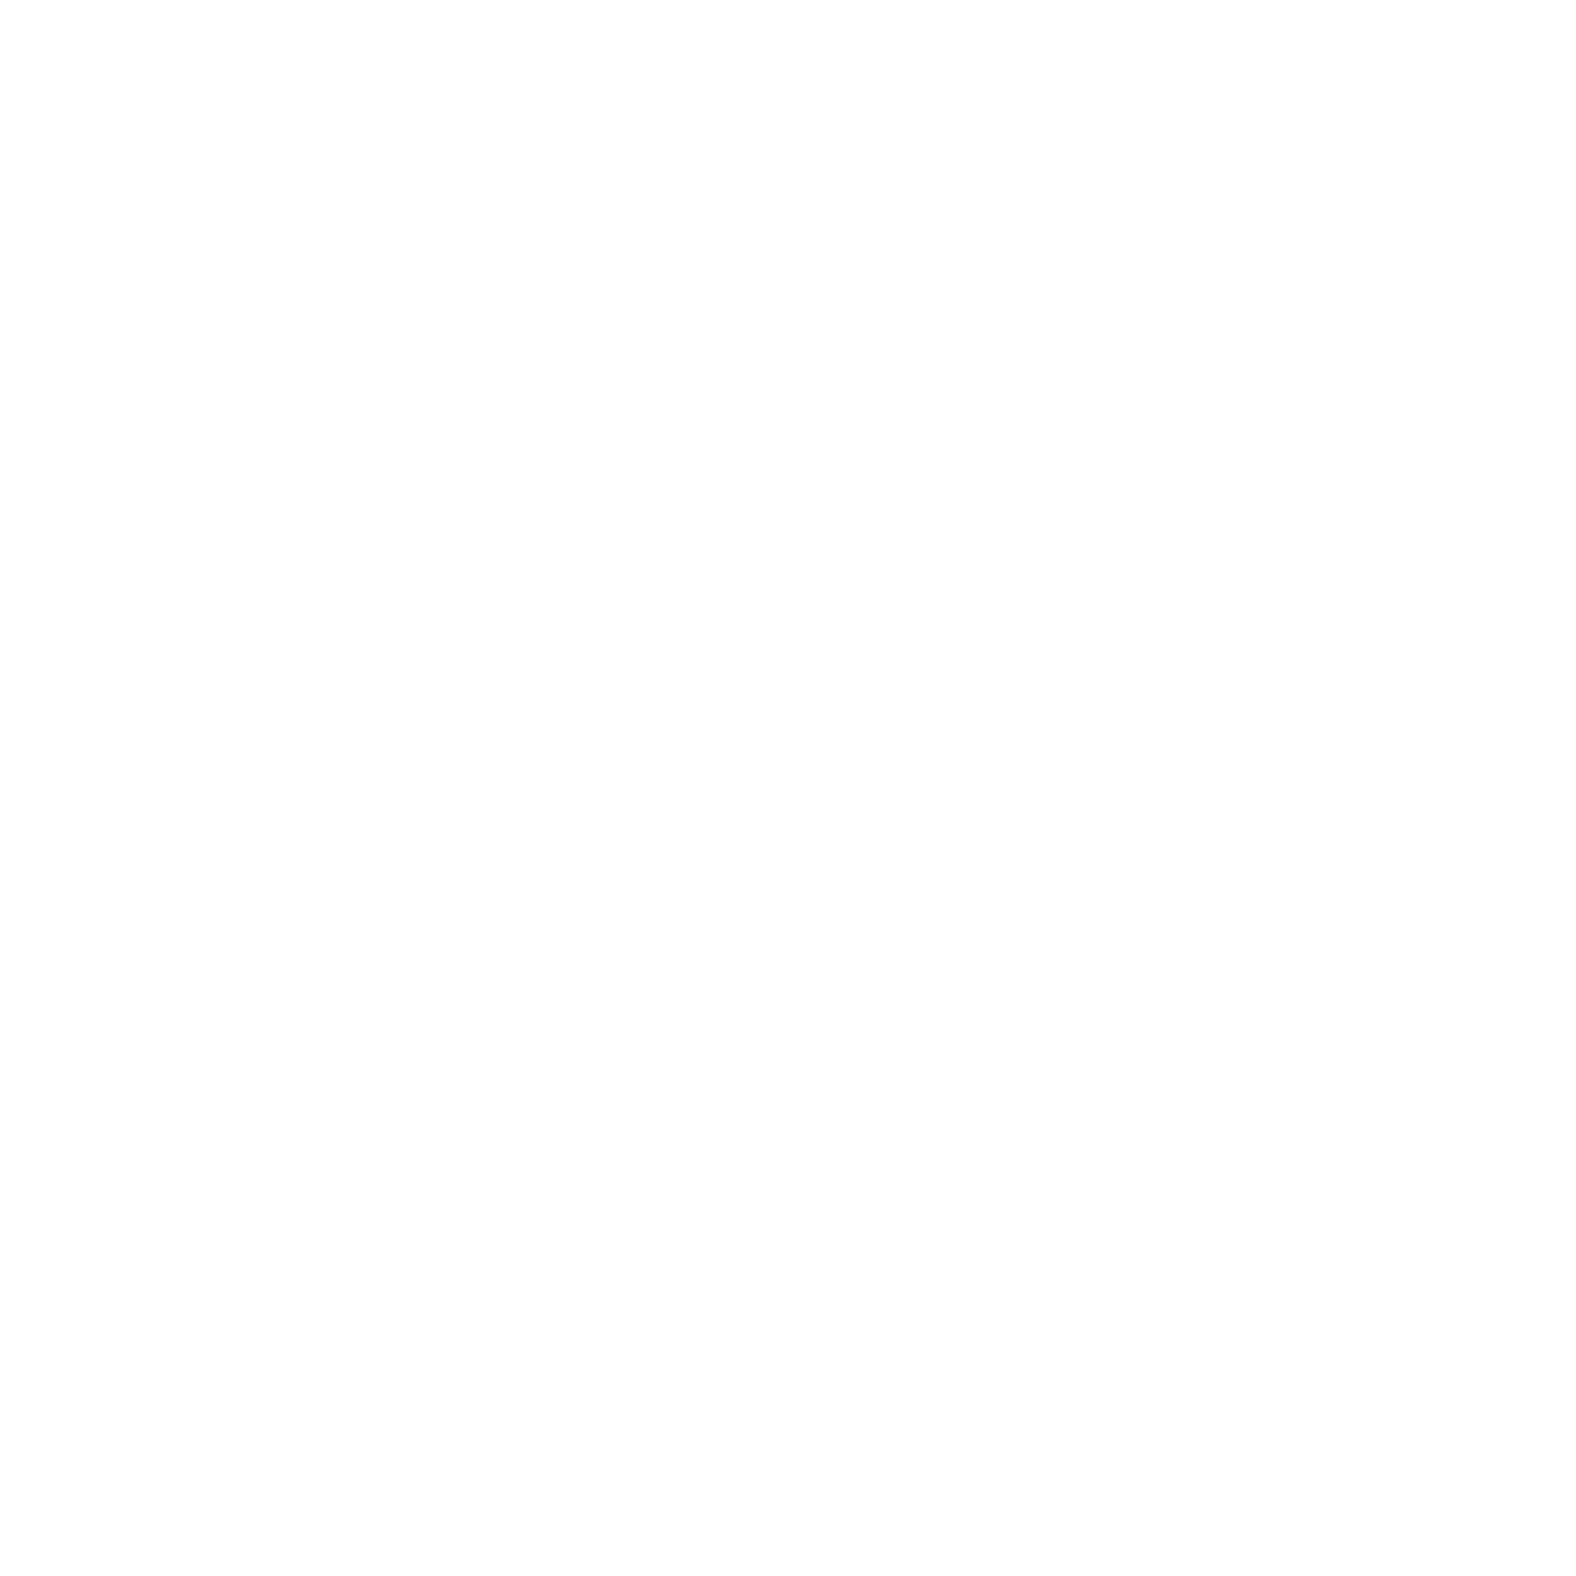 Welcome to Your New Favorite Burger Joint